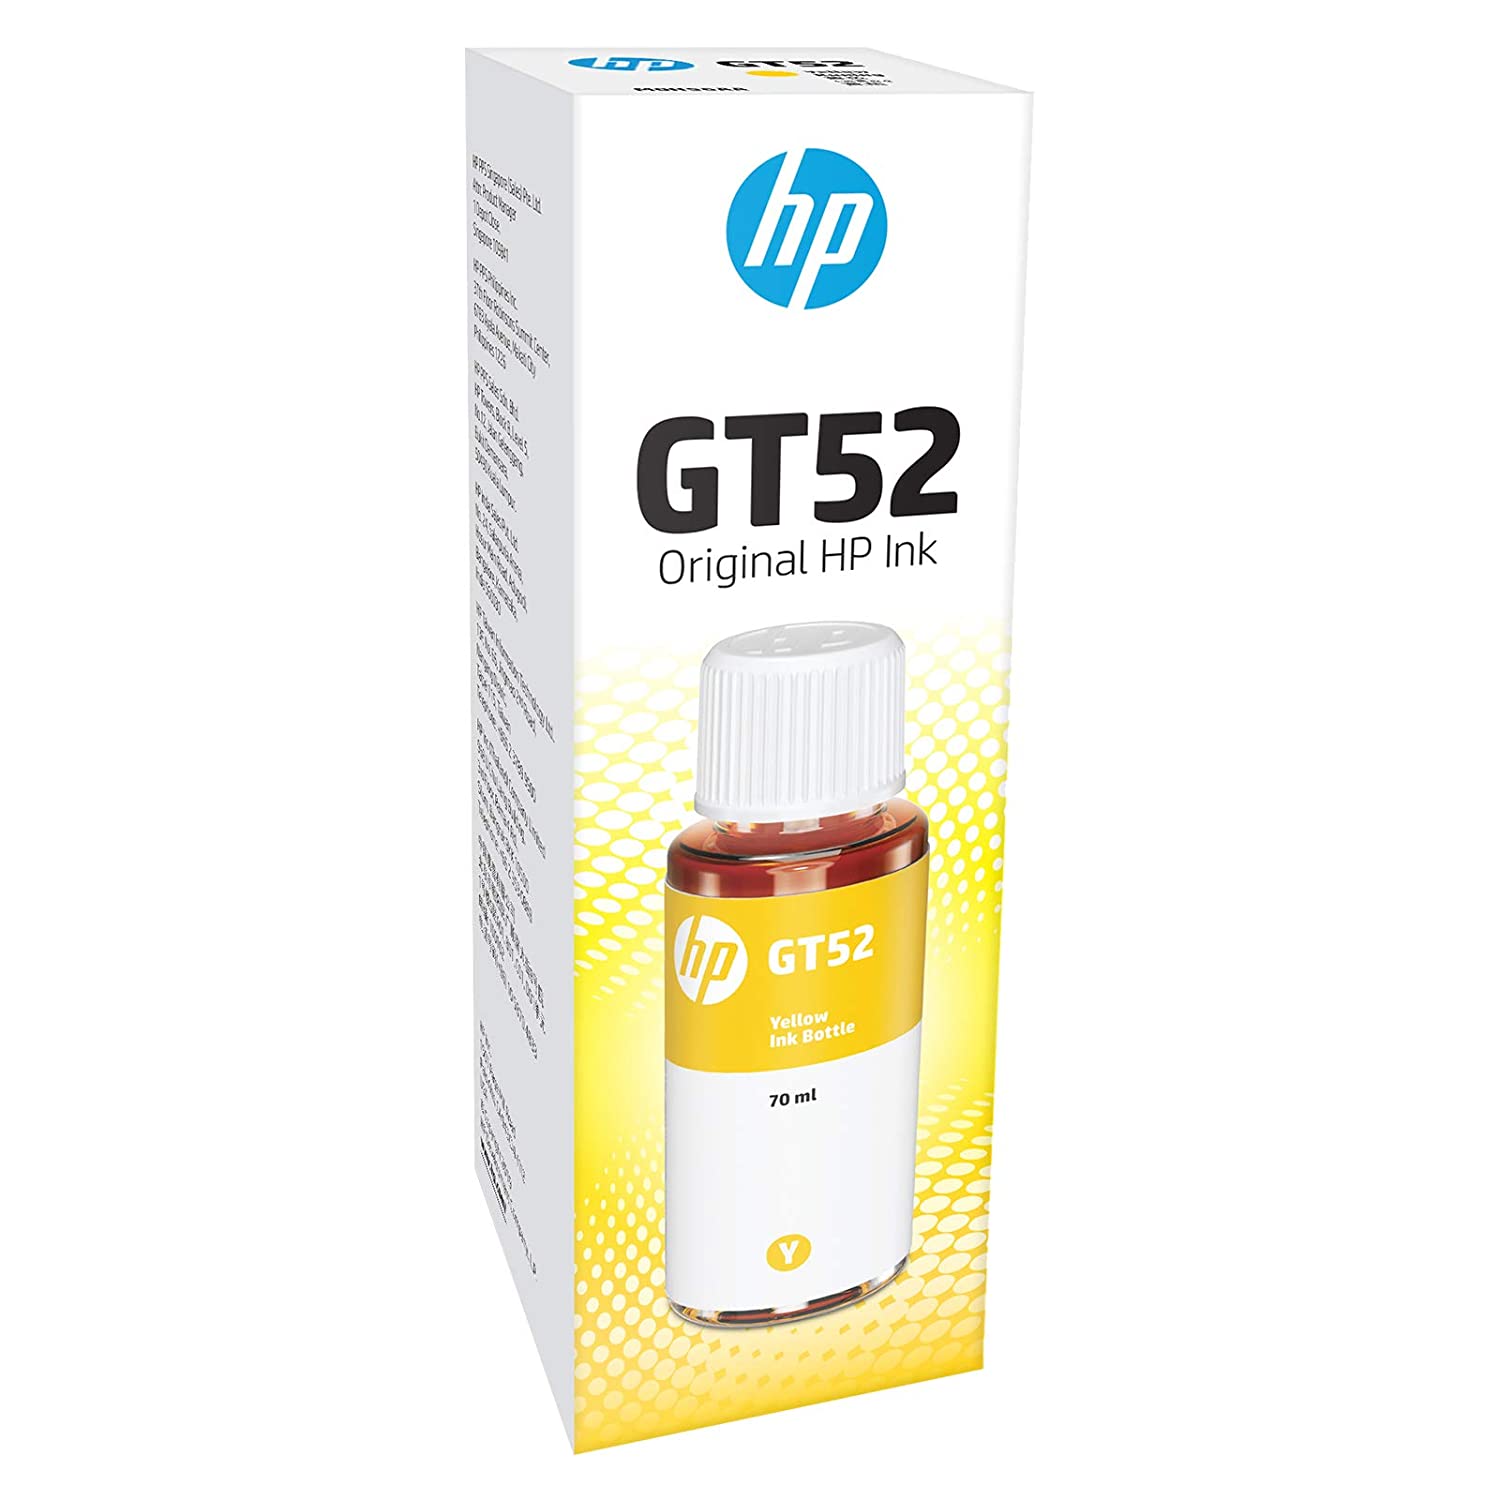 HP GT53 XL and GT52 Refill Ink Bottle for HP Ink Tank Printers